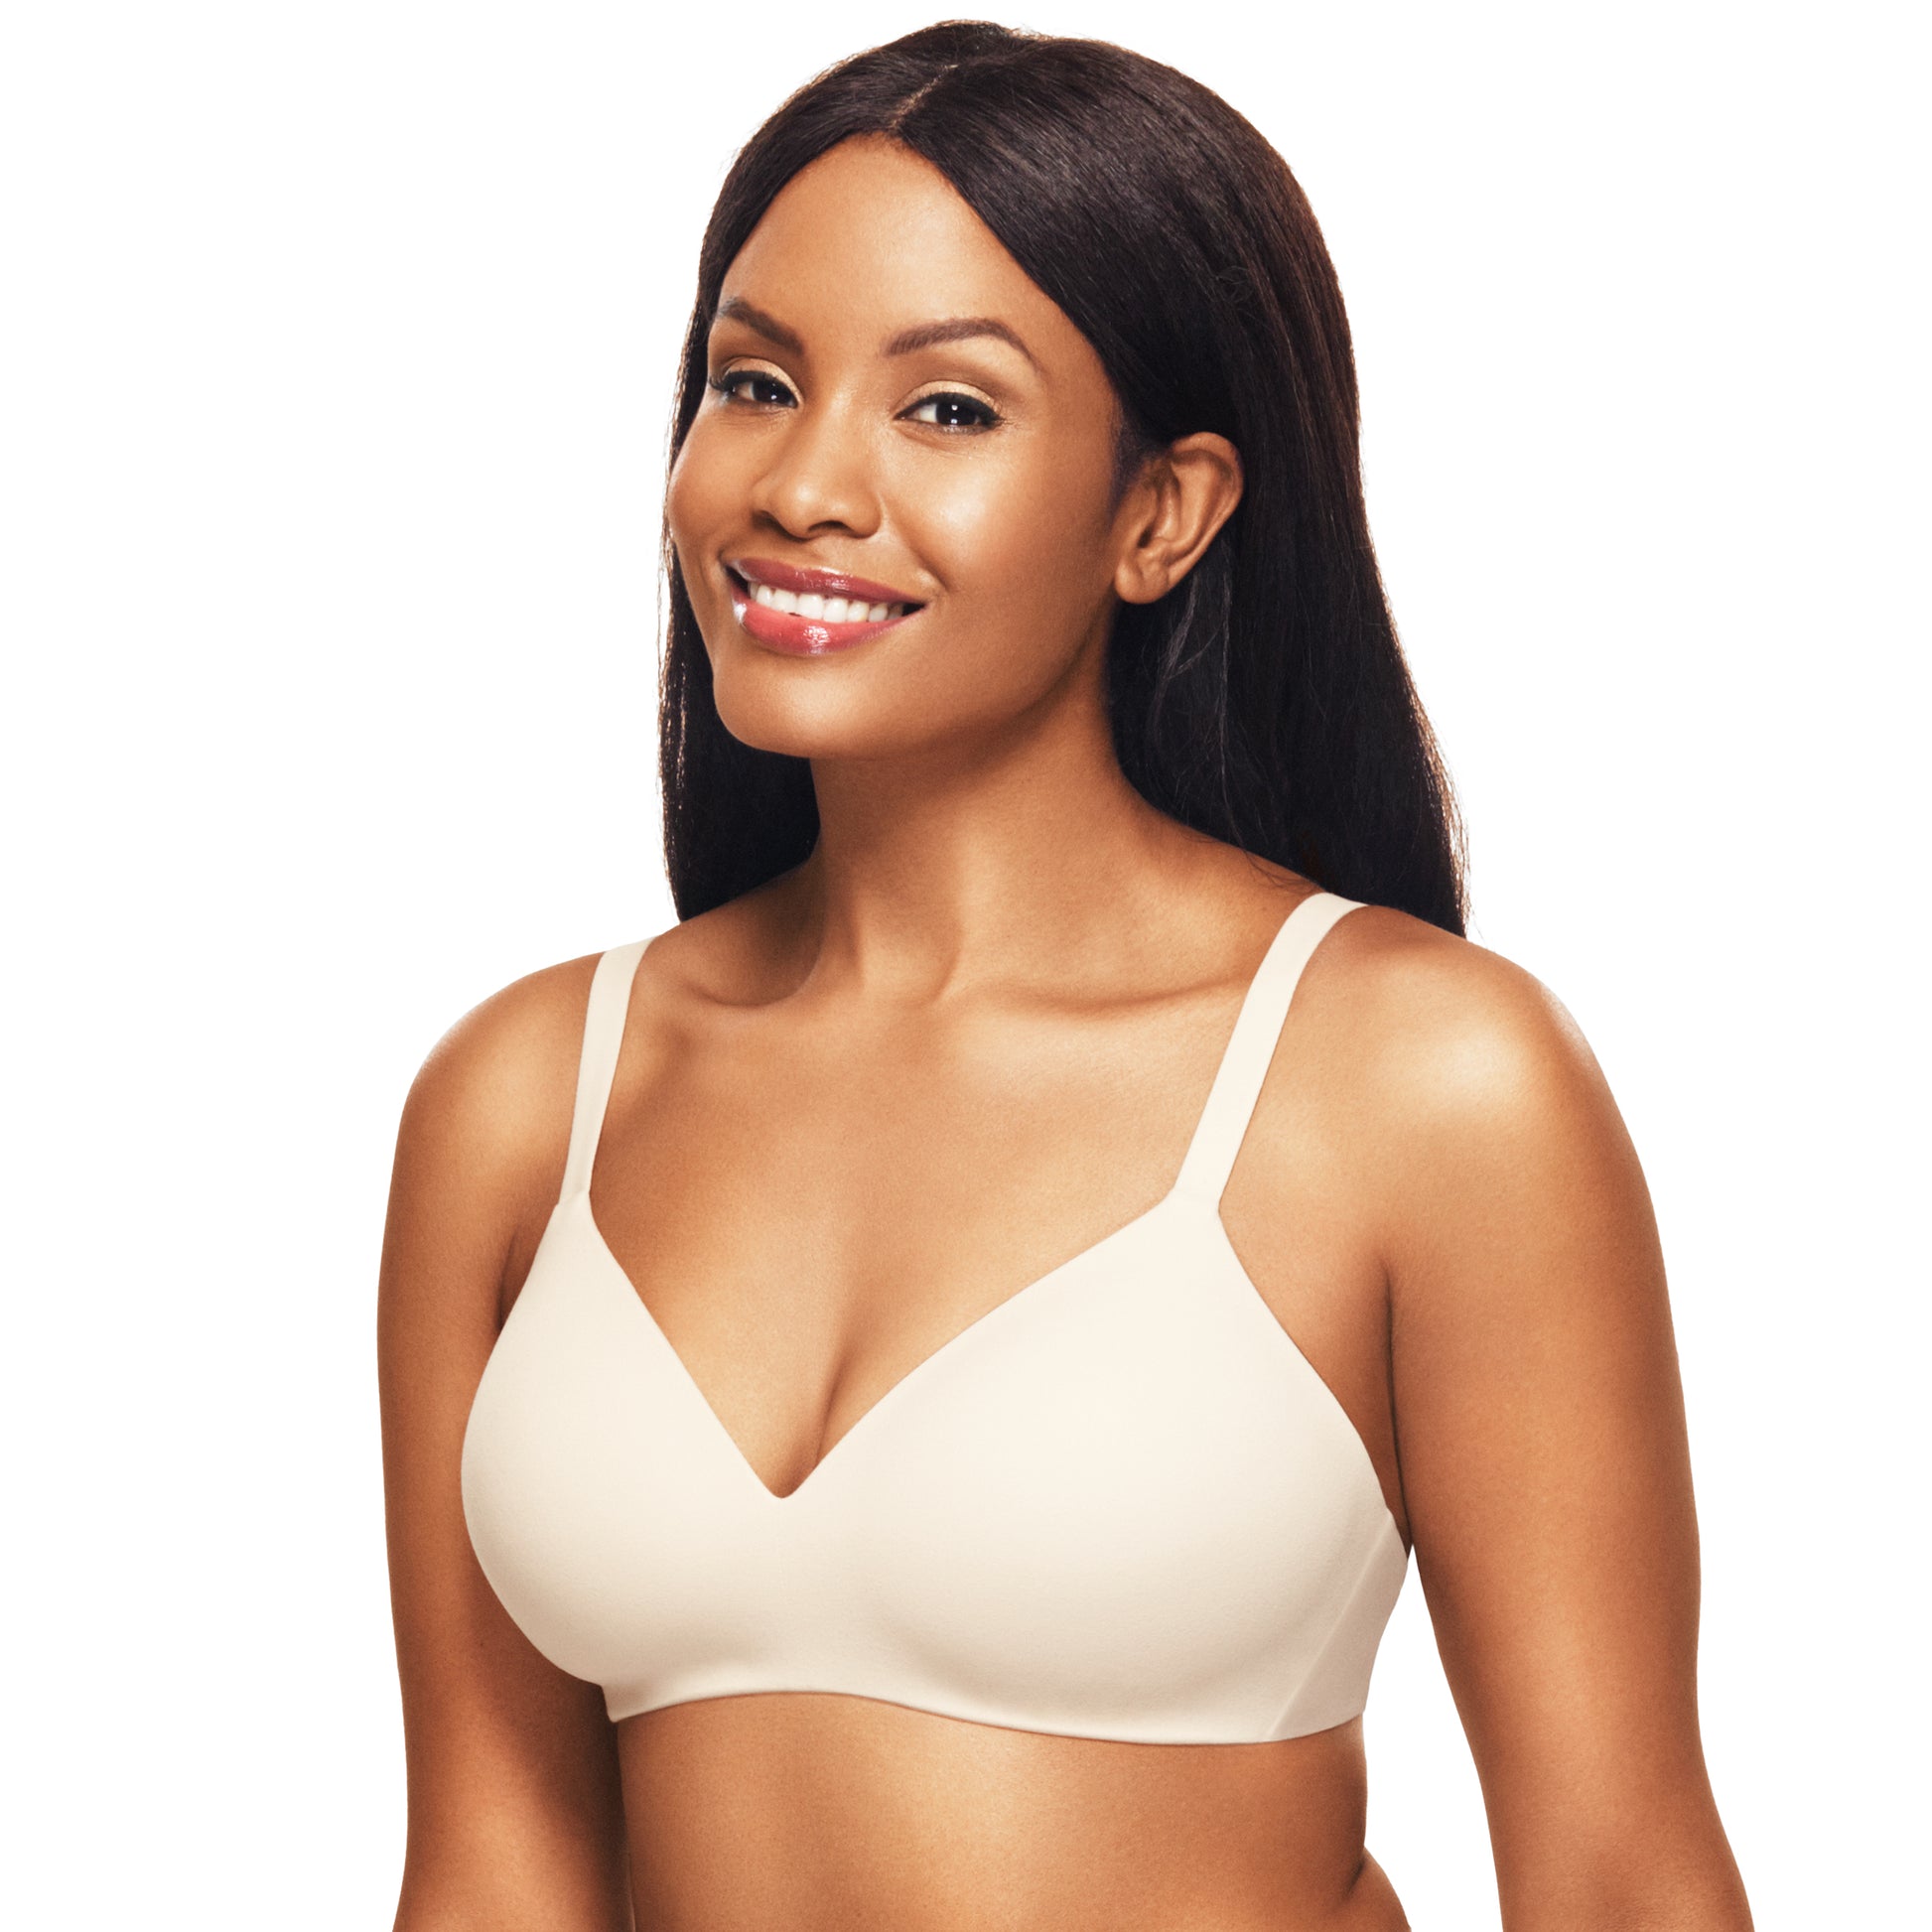 Shop Online for Wacoal Intimate Apparel